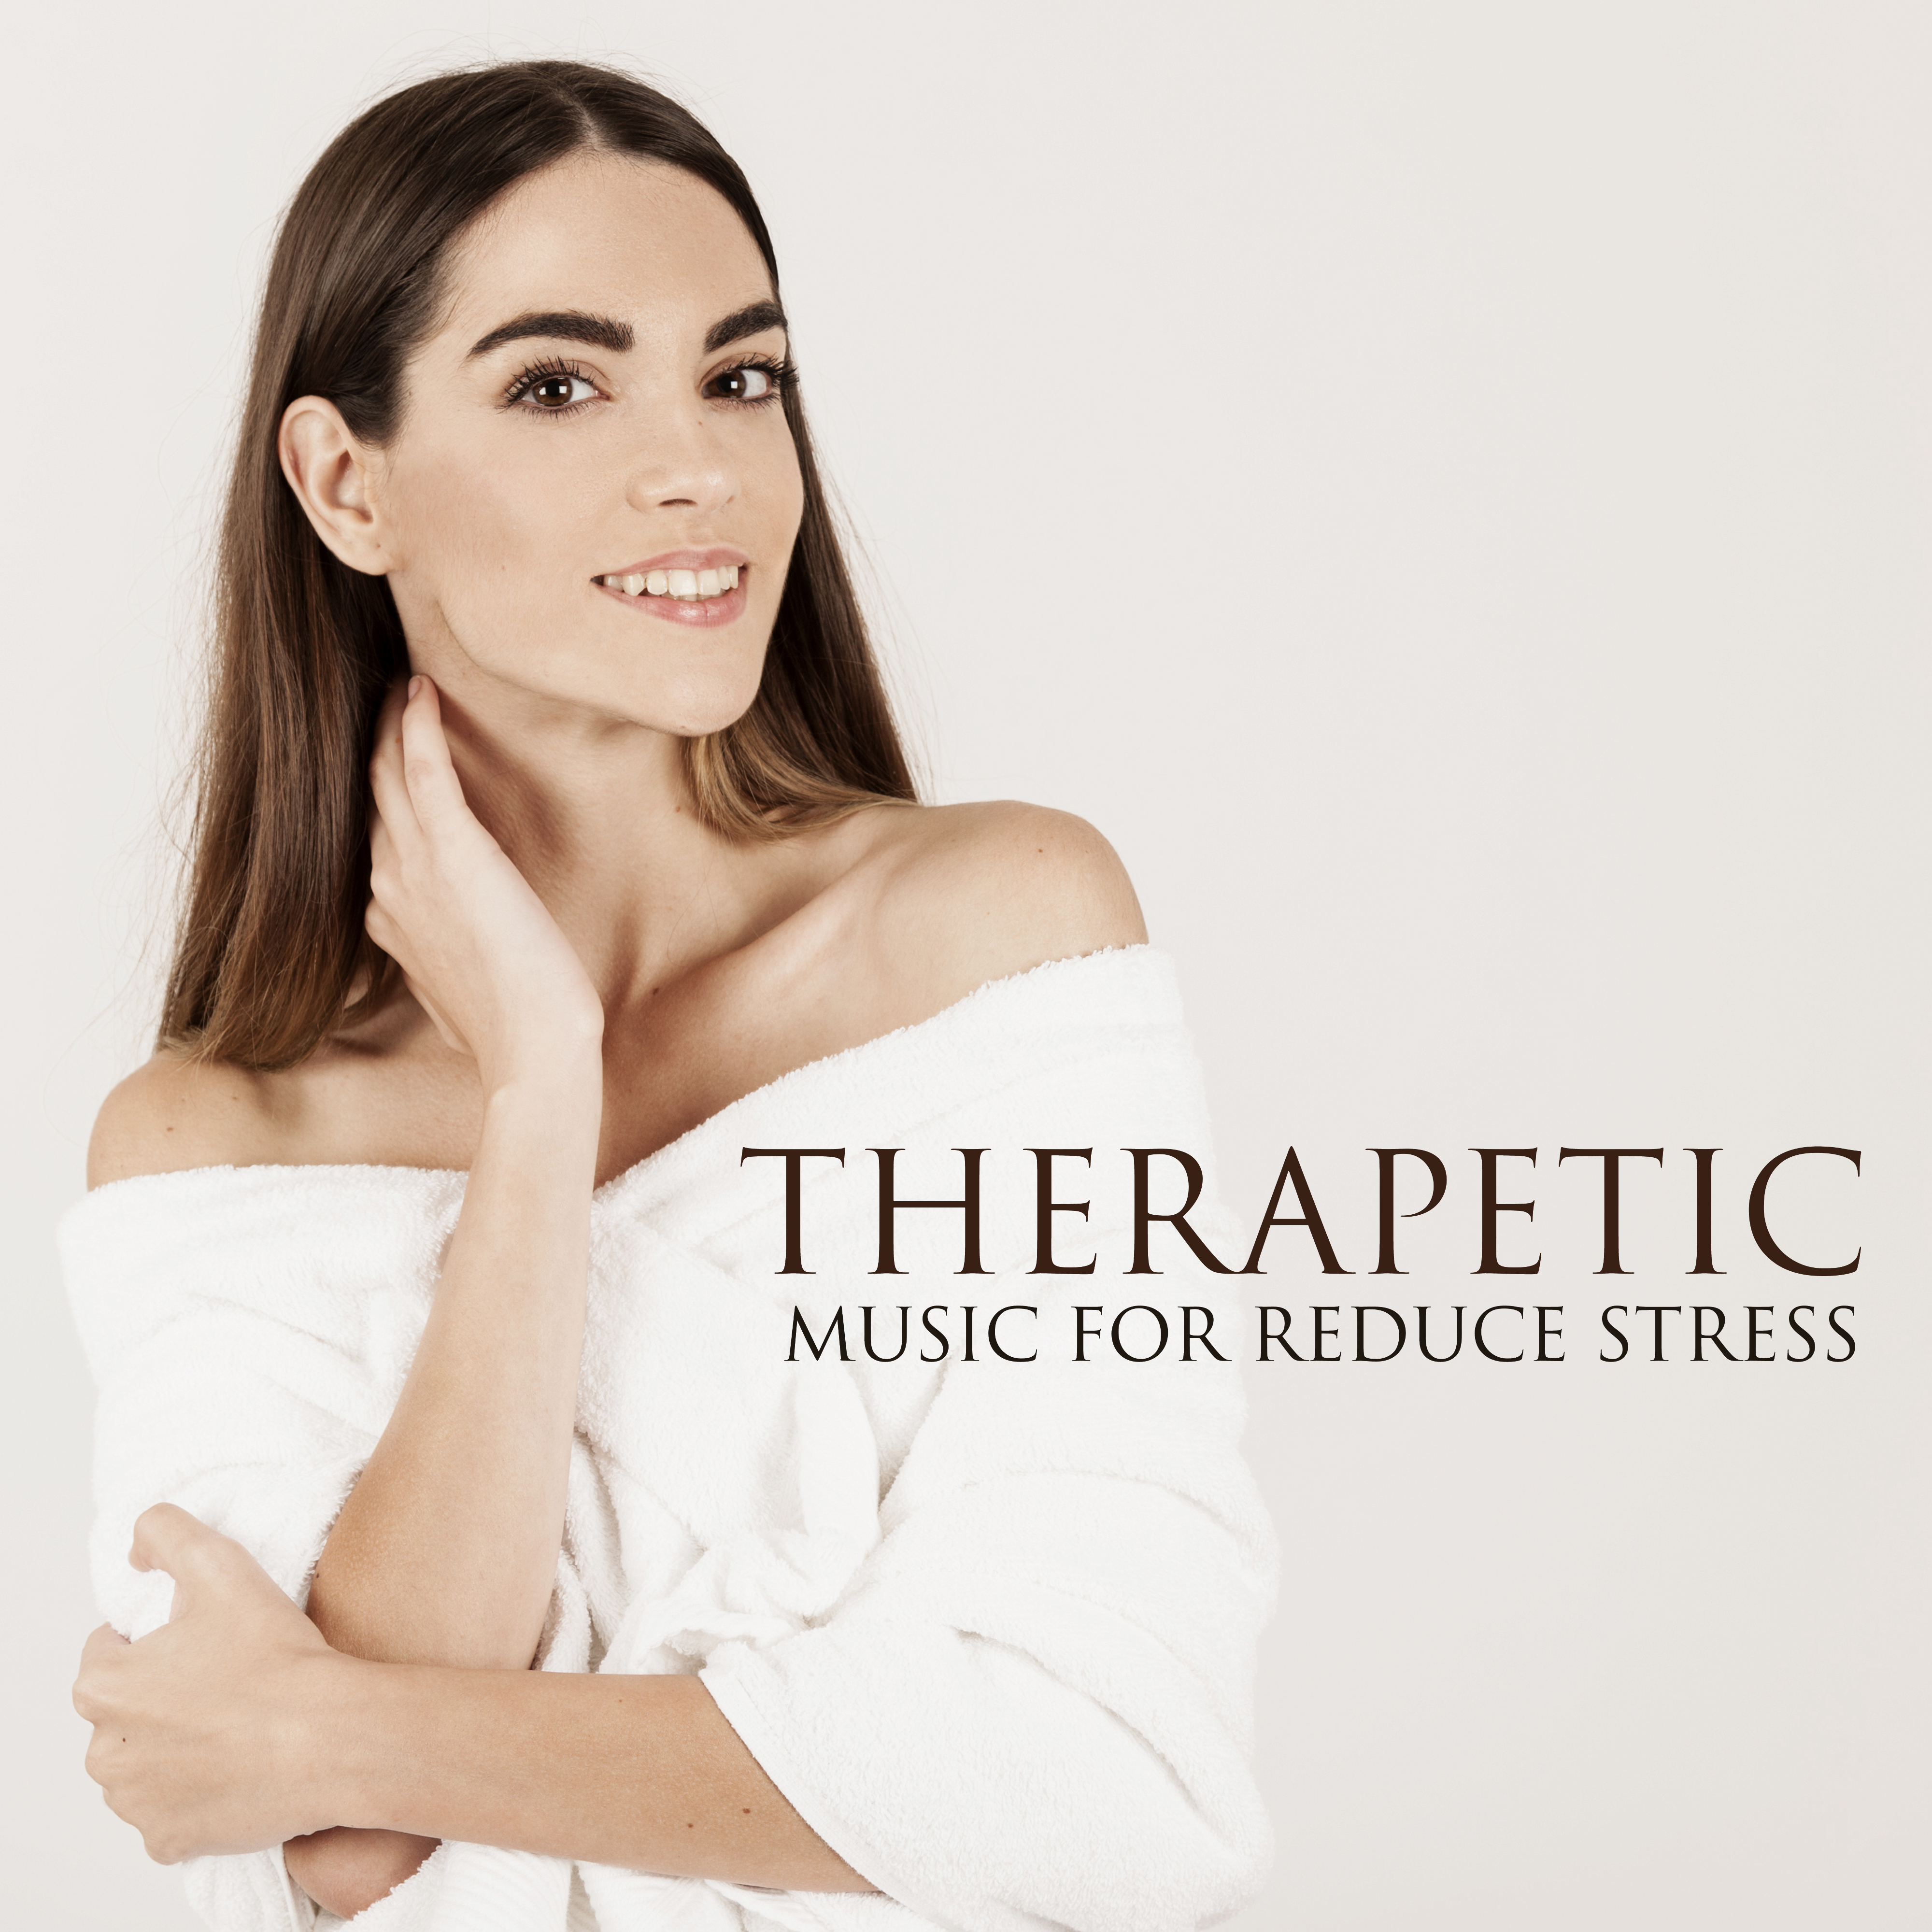 Therapetic Music for Reduce Stress